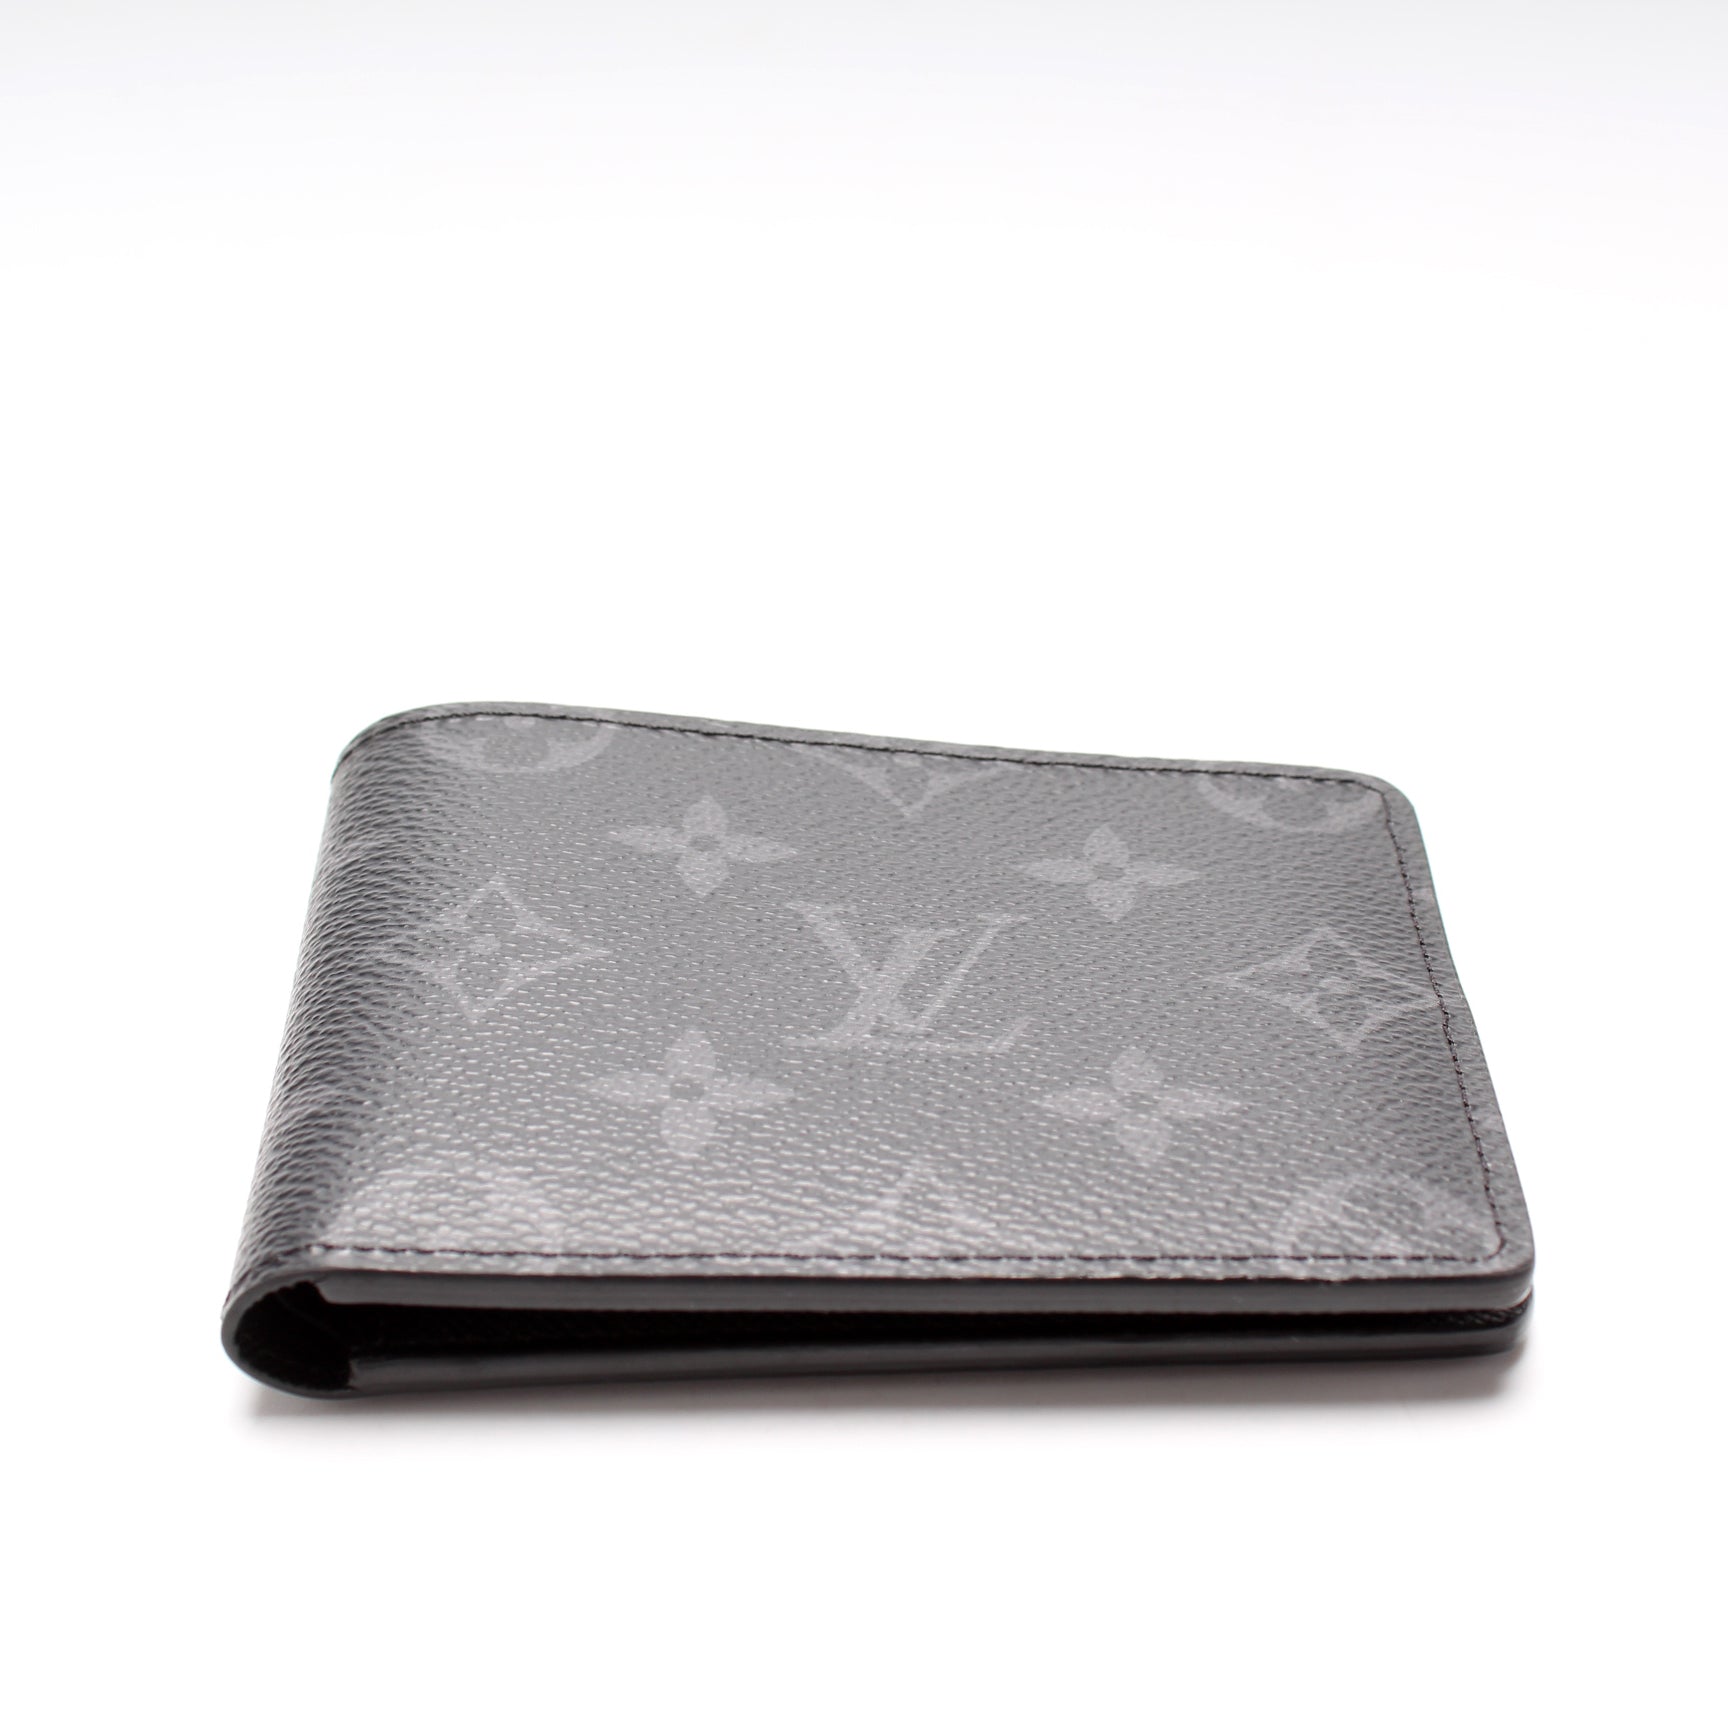 Slender Wallet Monogram Eclipse - Wallets and Small Leather Goods